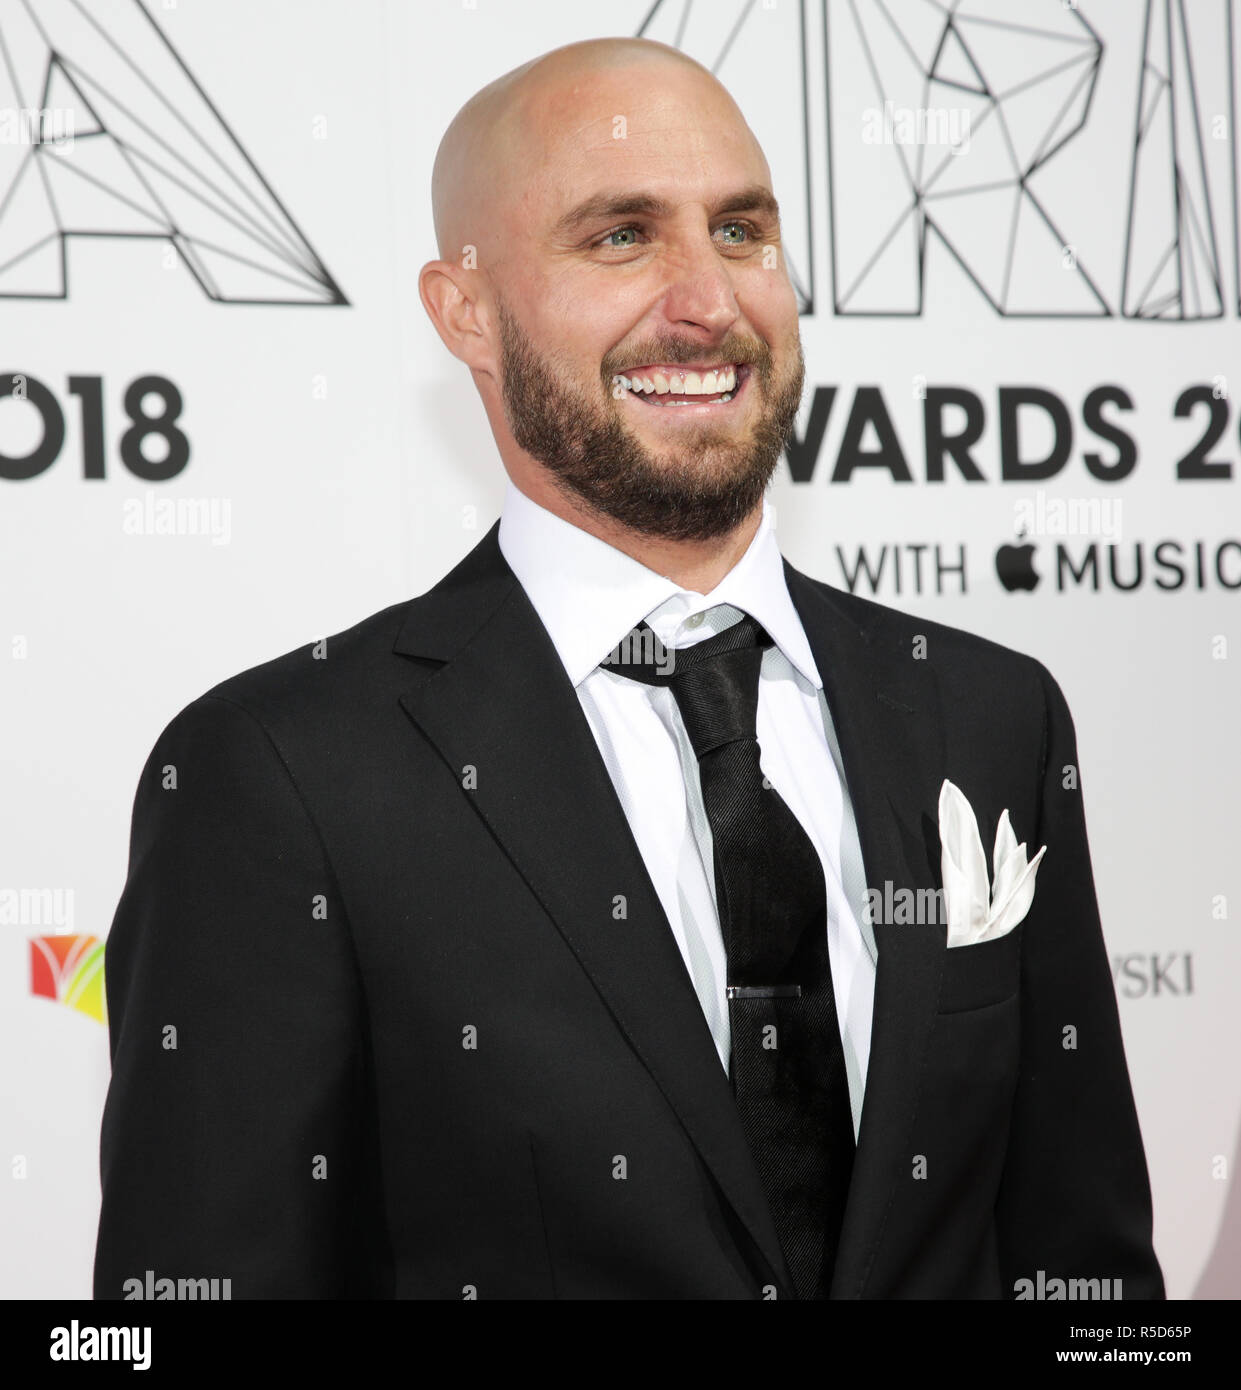 Sydney, NSW, Australia. 28th Nov, 2018. Paul Fisher seen on the red carpet  during the 2018 ARIA Awards. Credit: Belinda Vel/SOPA Images/ZUMA  Wire/Alamy Live News Stock Photo - Alamy